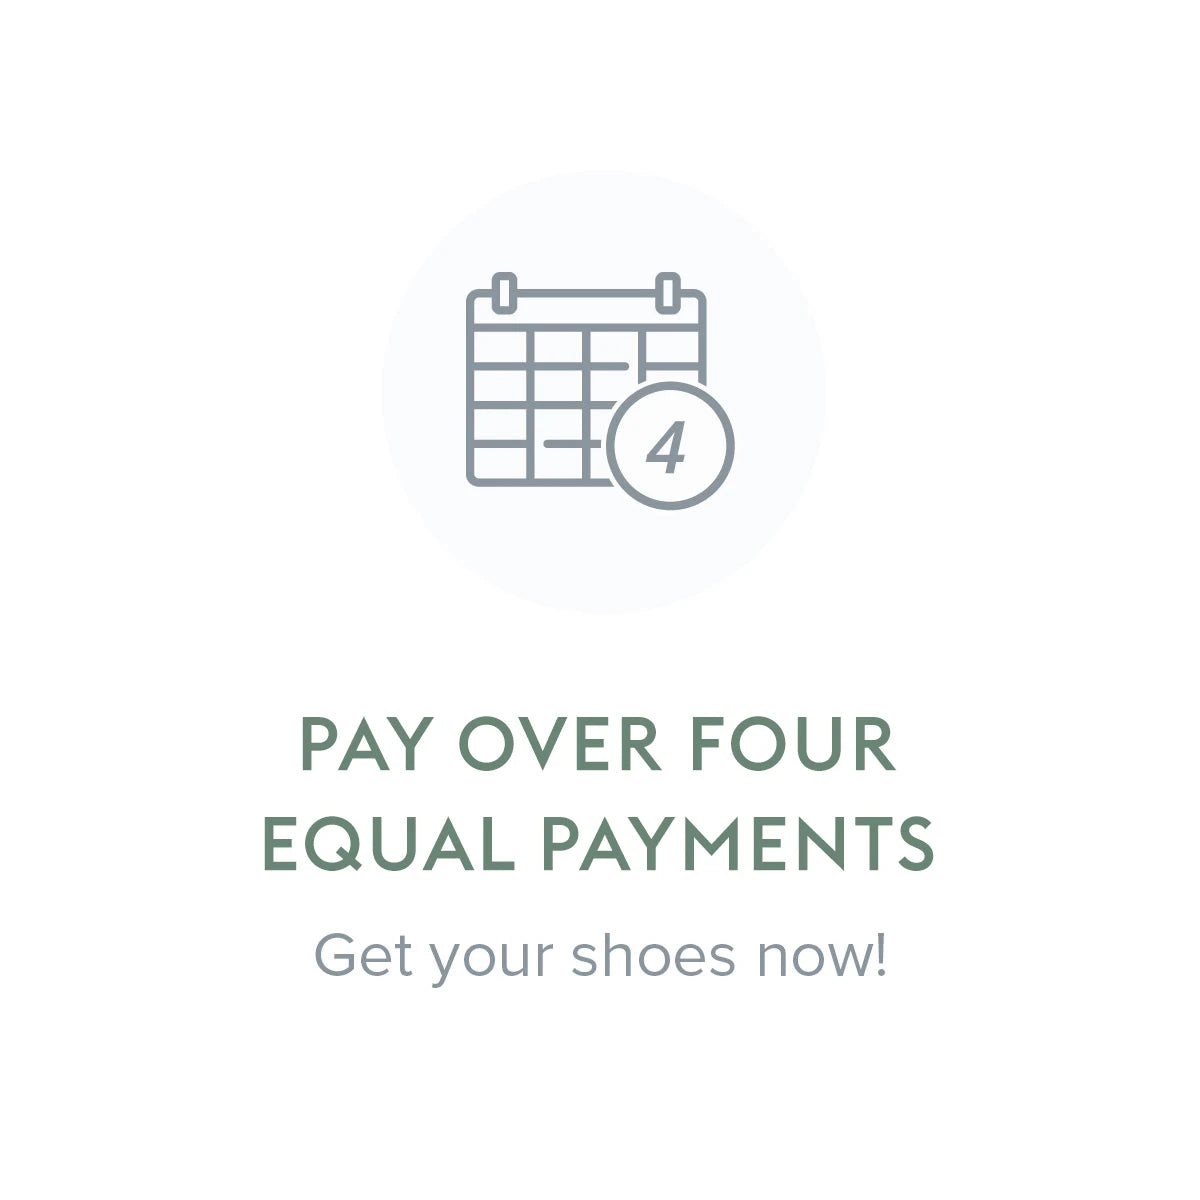 Pay over four equal payments